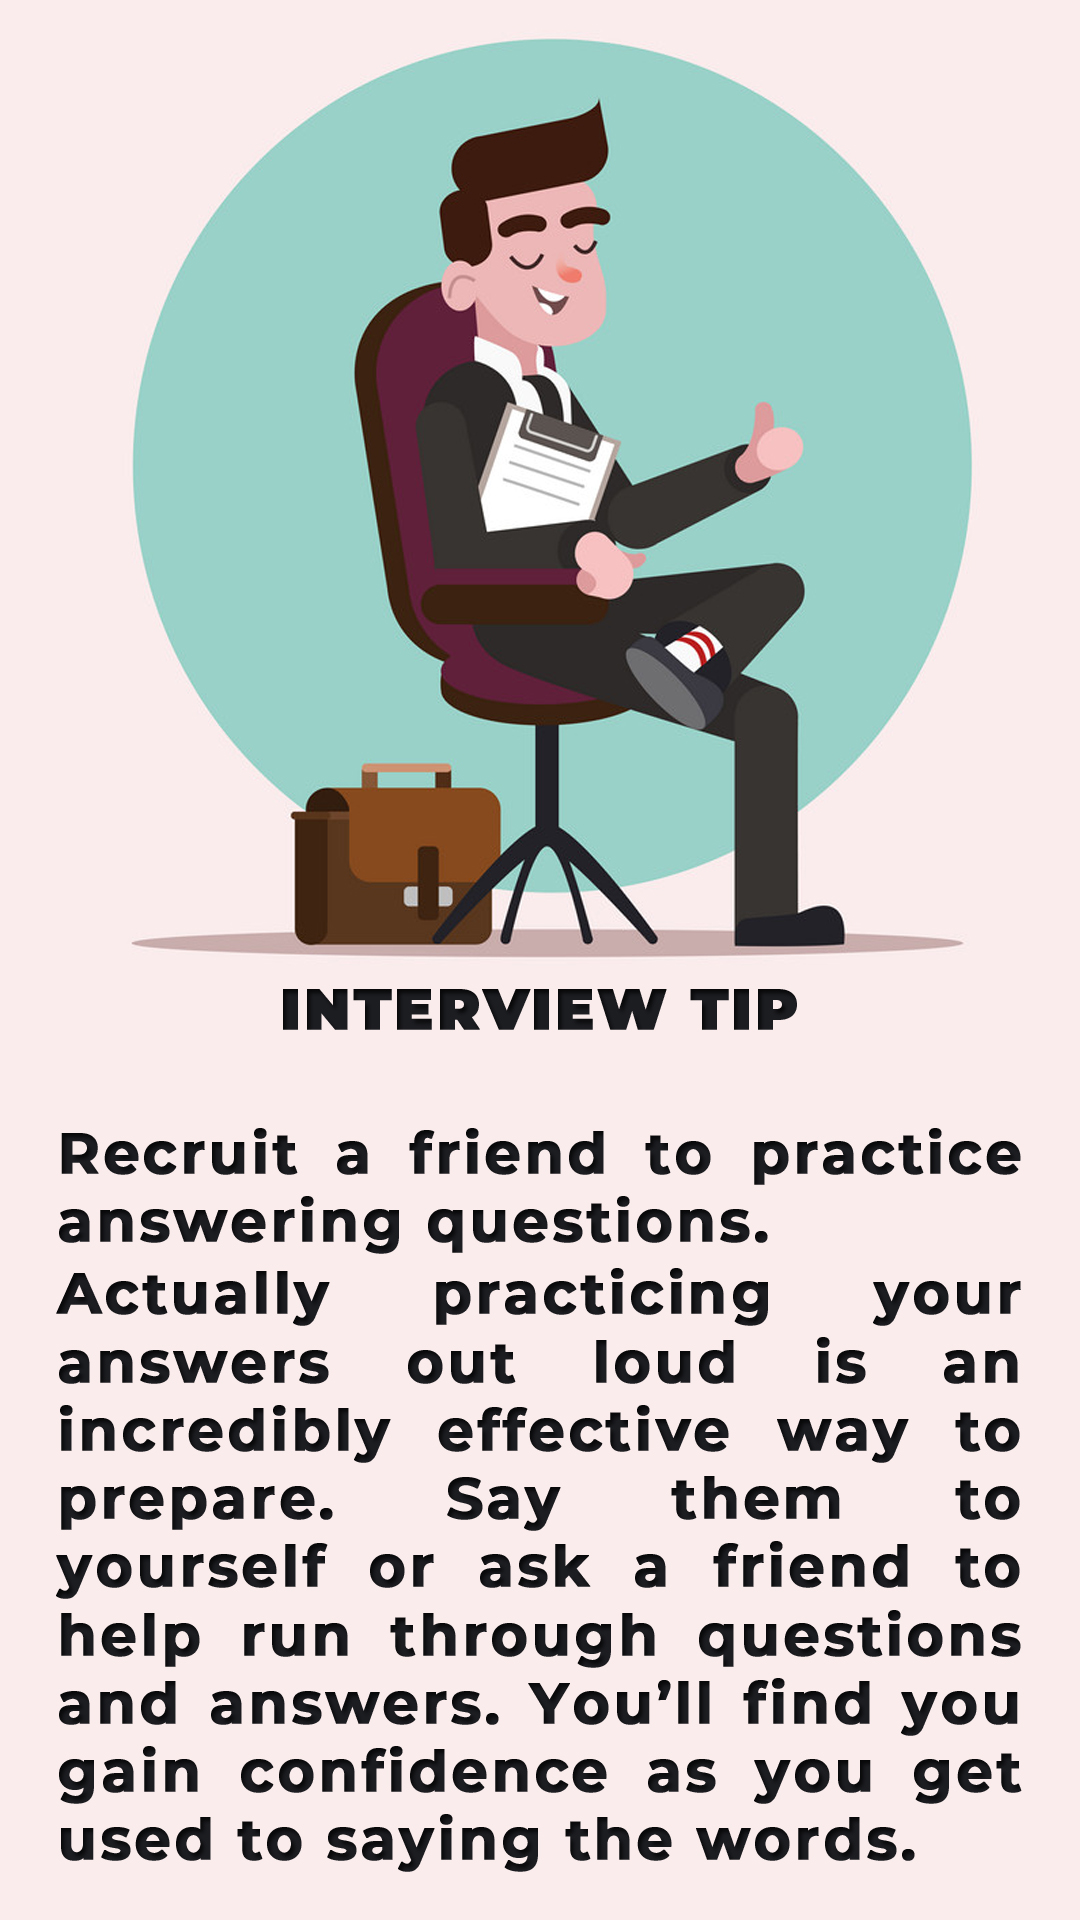 Recruit a friend to practice answering questions.